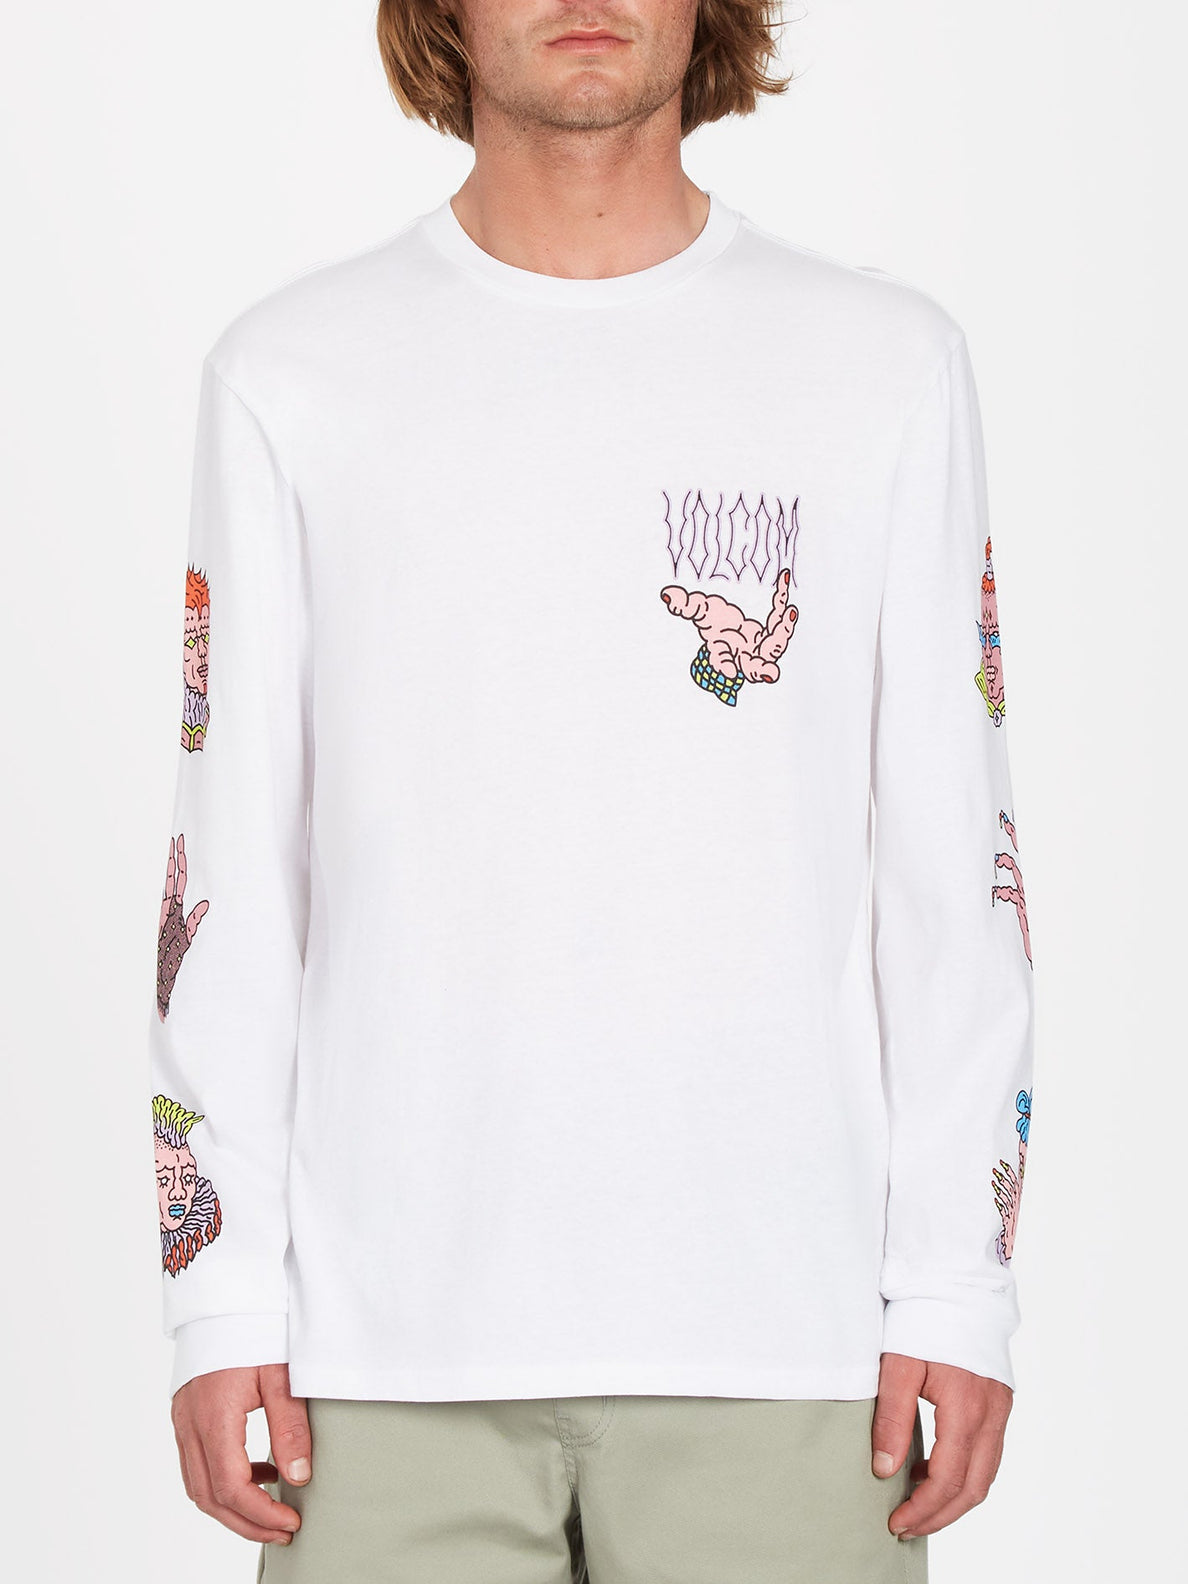 Connected Minds T-shirt - WHITE (A3612306_WHT) [B]